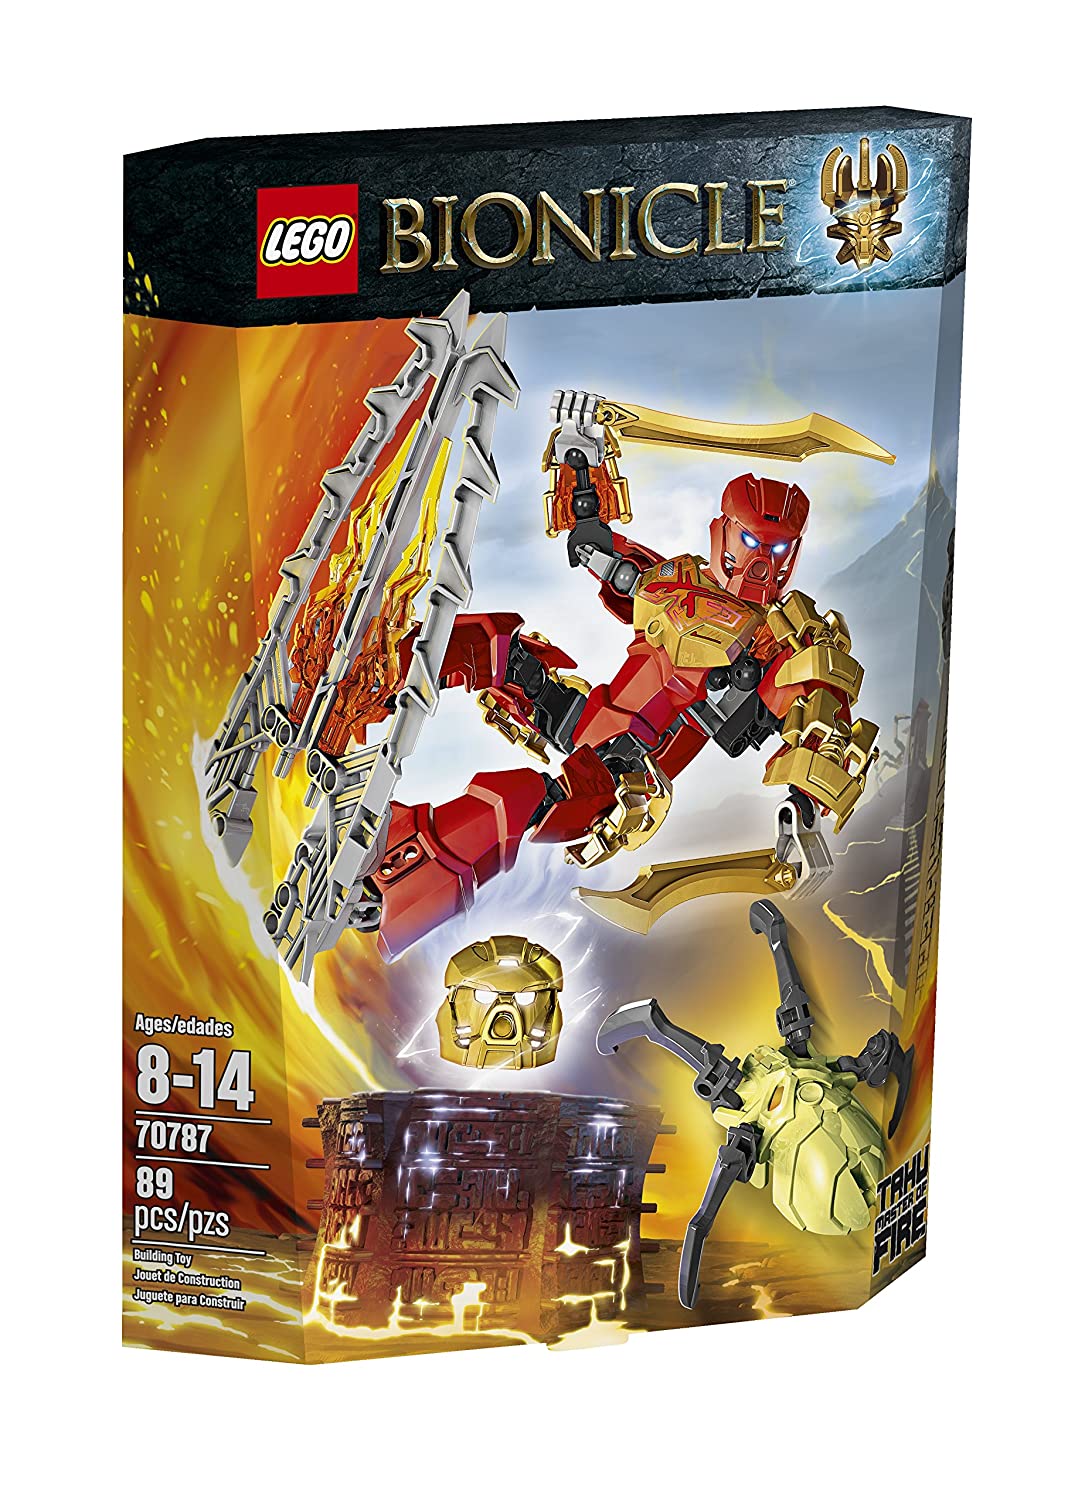 15 Best Lego BIONICLE Sets 2022 - Buying Guide & Reviews 12